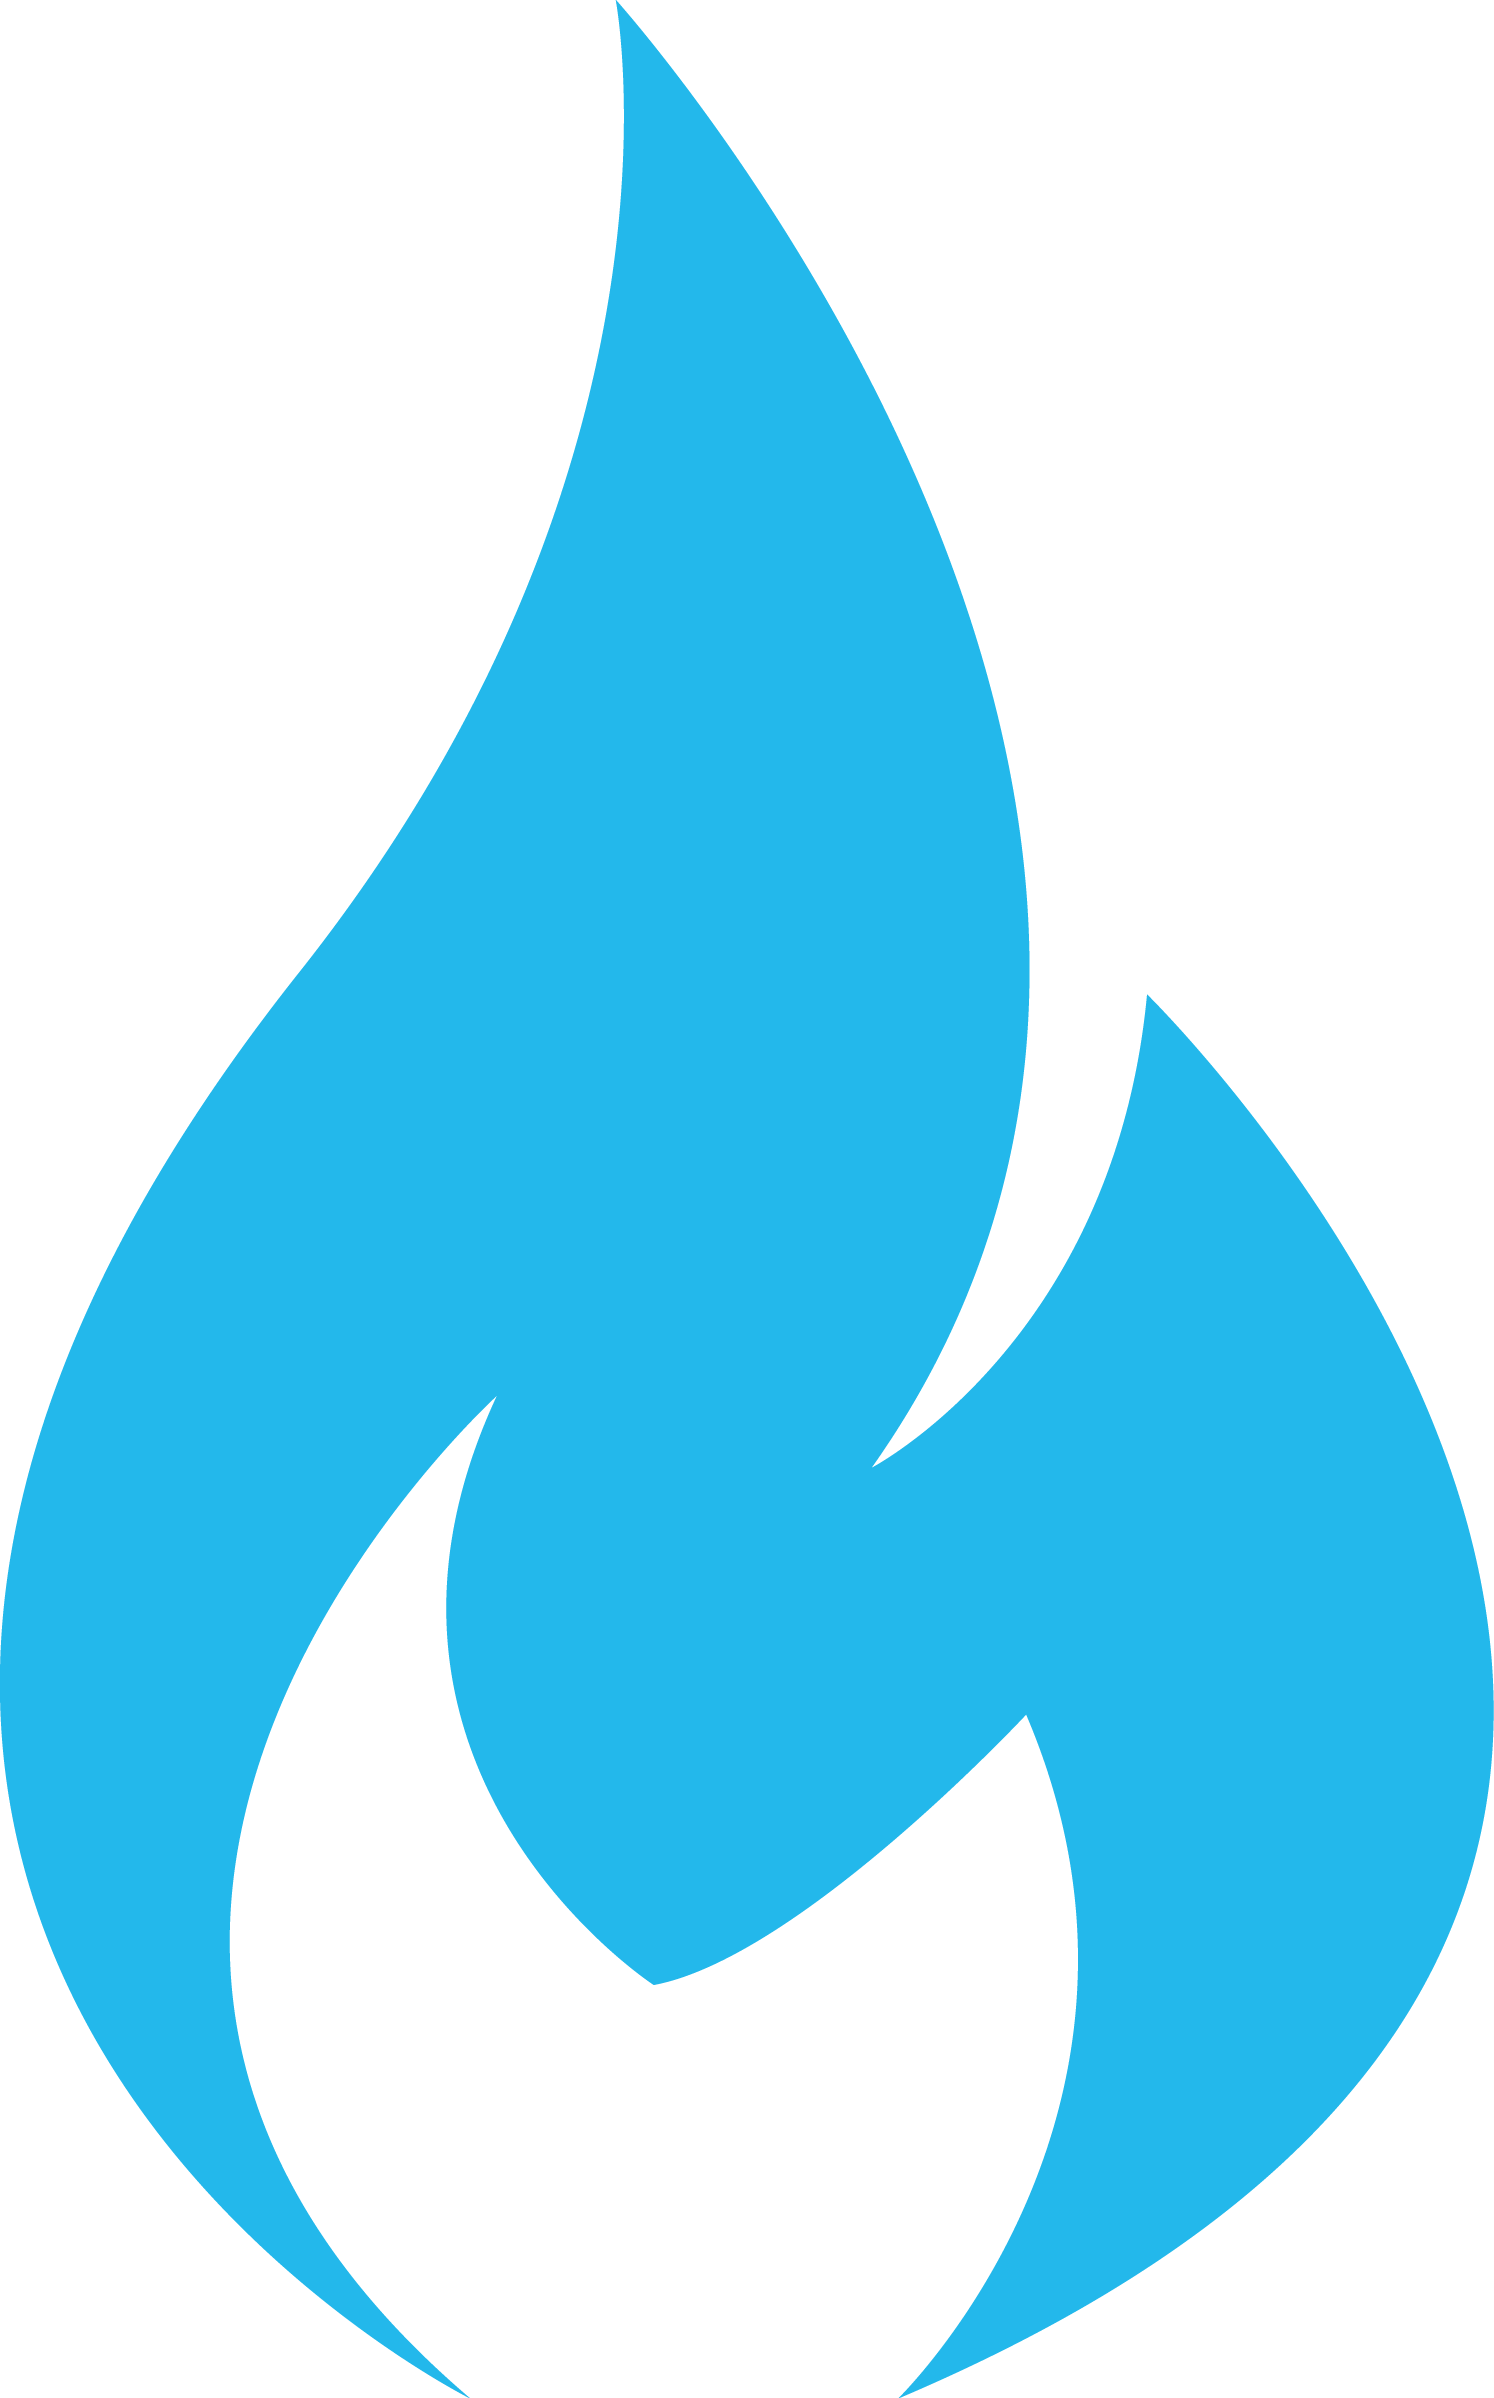 Gas - Symbol For Natural Gas (1494x2398)